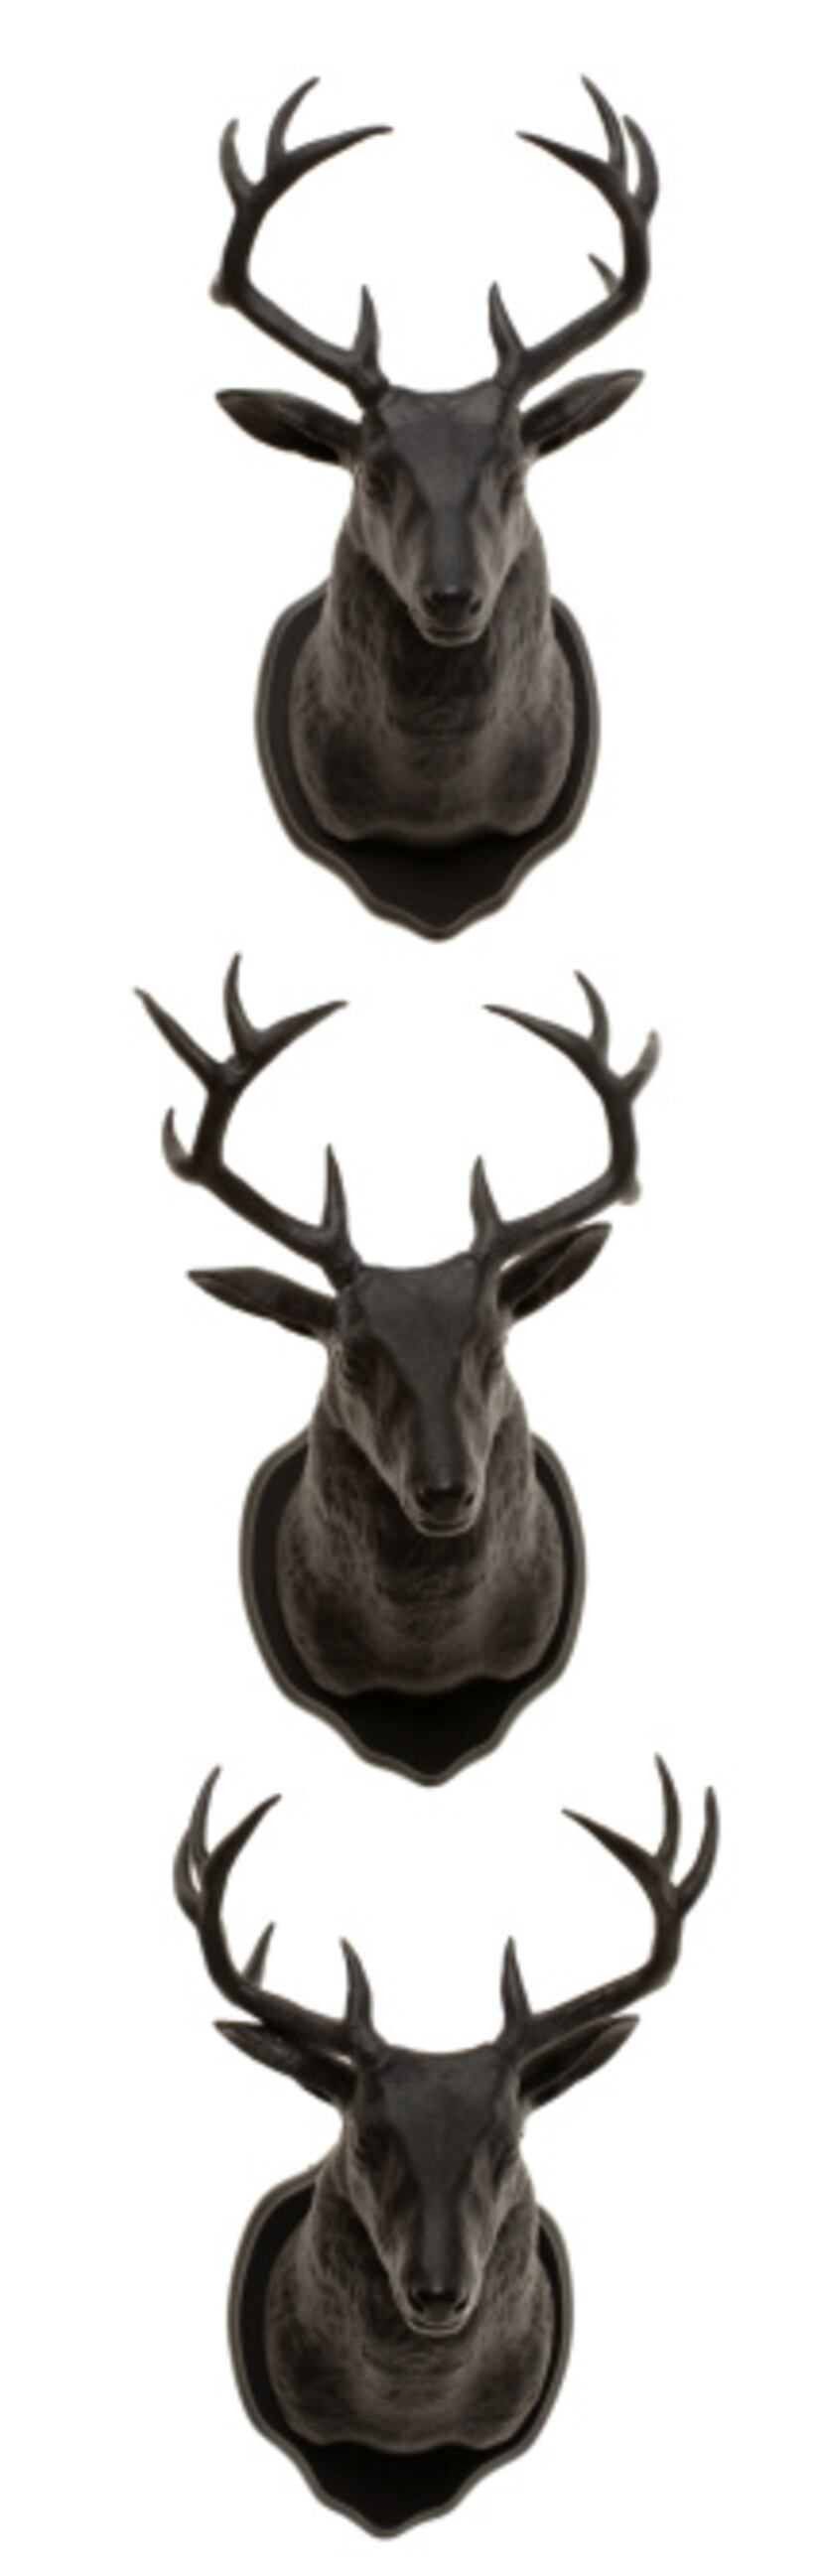 Animal house: Magnetic white-tailed deer taxidermy magnets rakishly hold jewelry or hats....